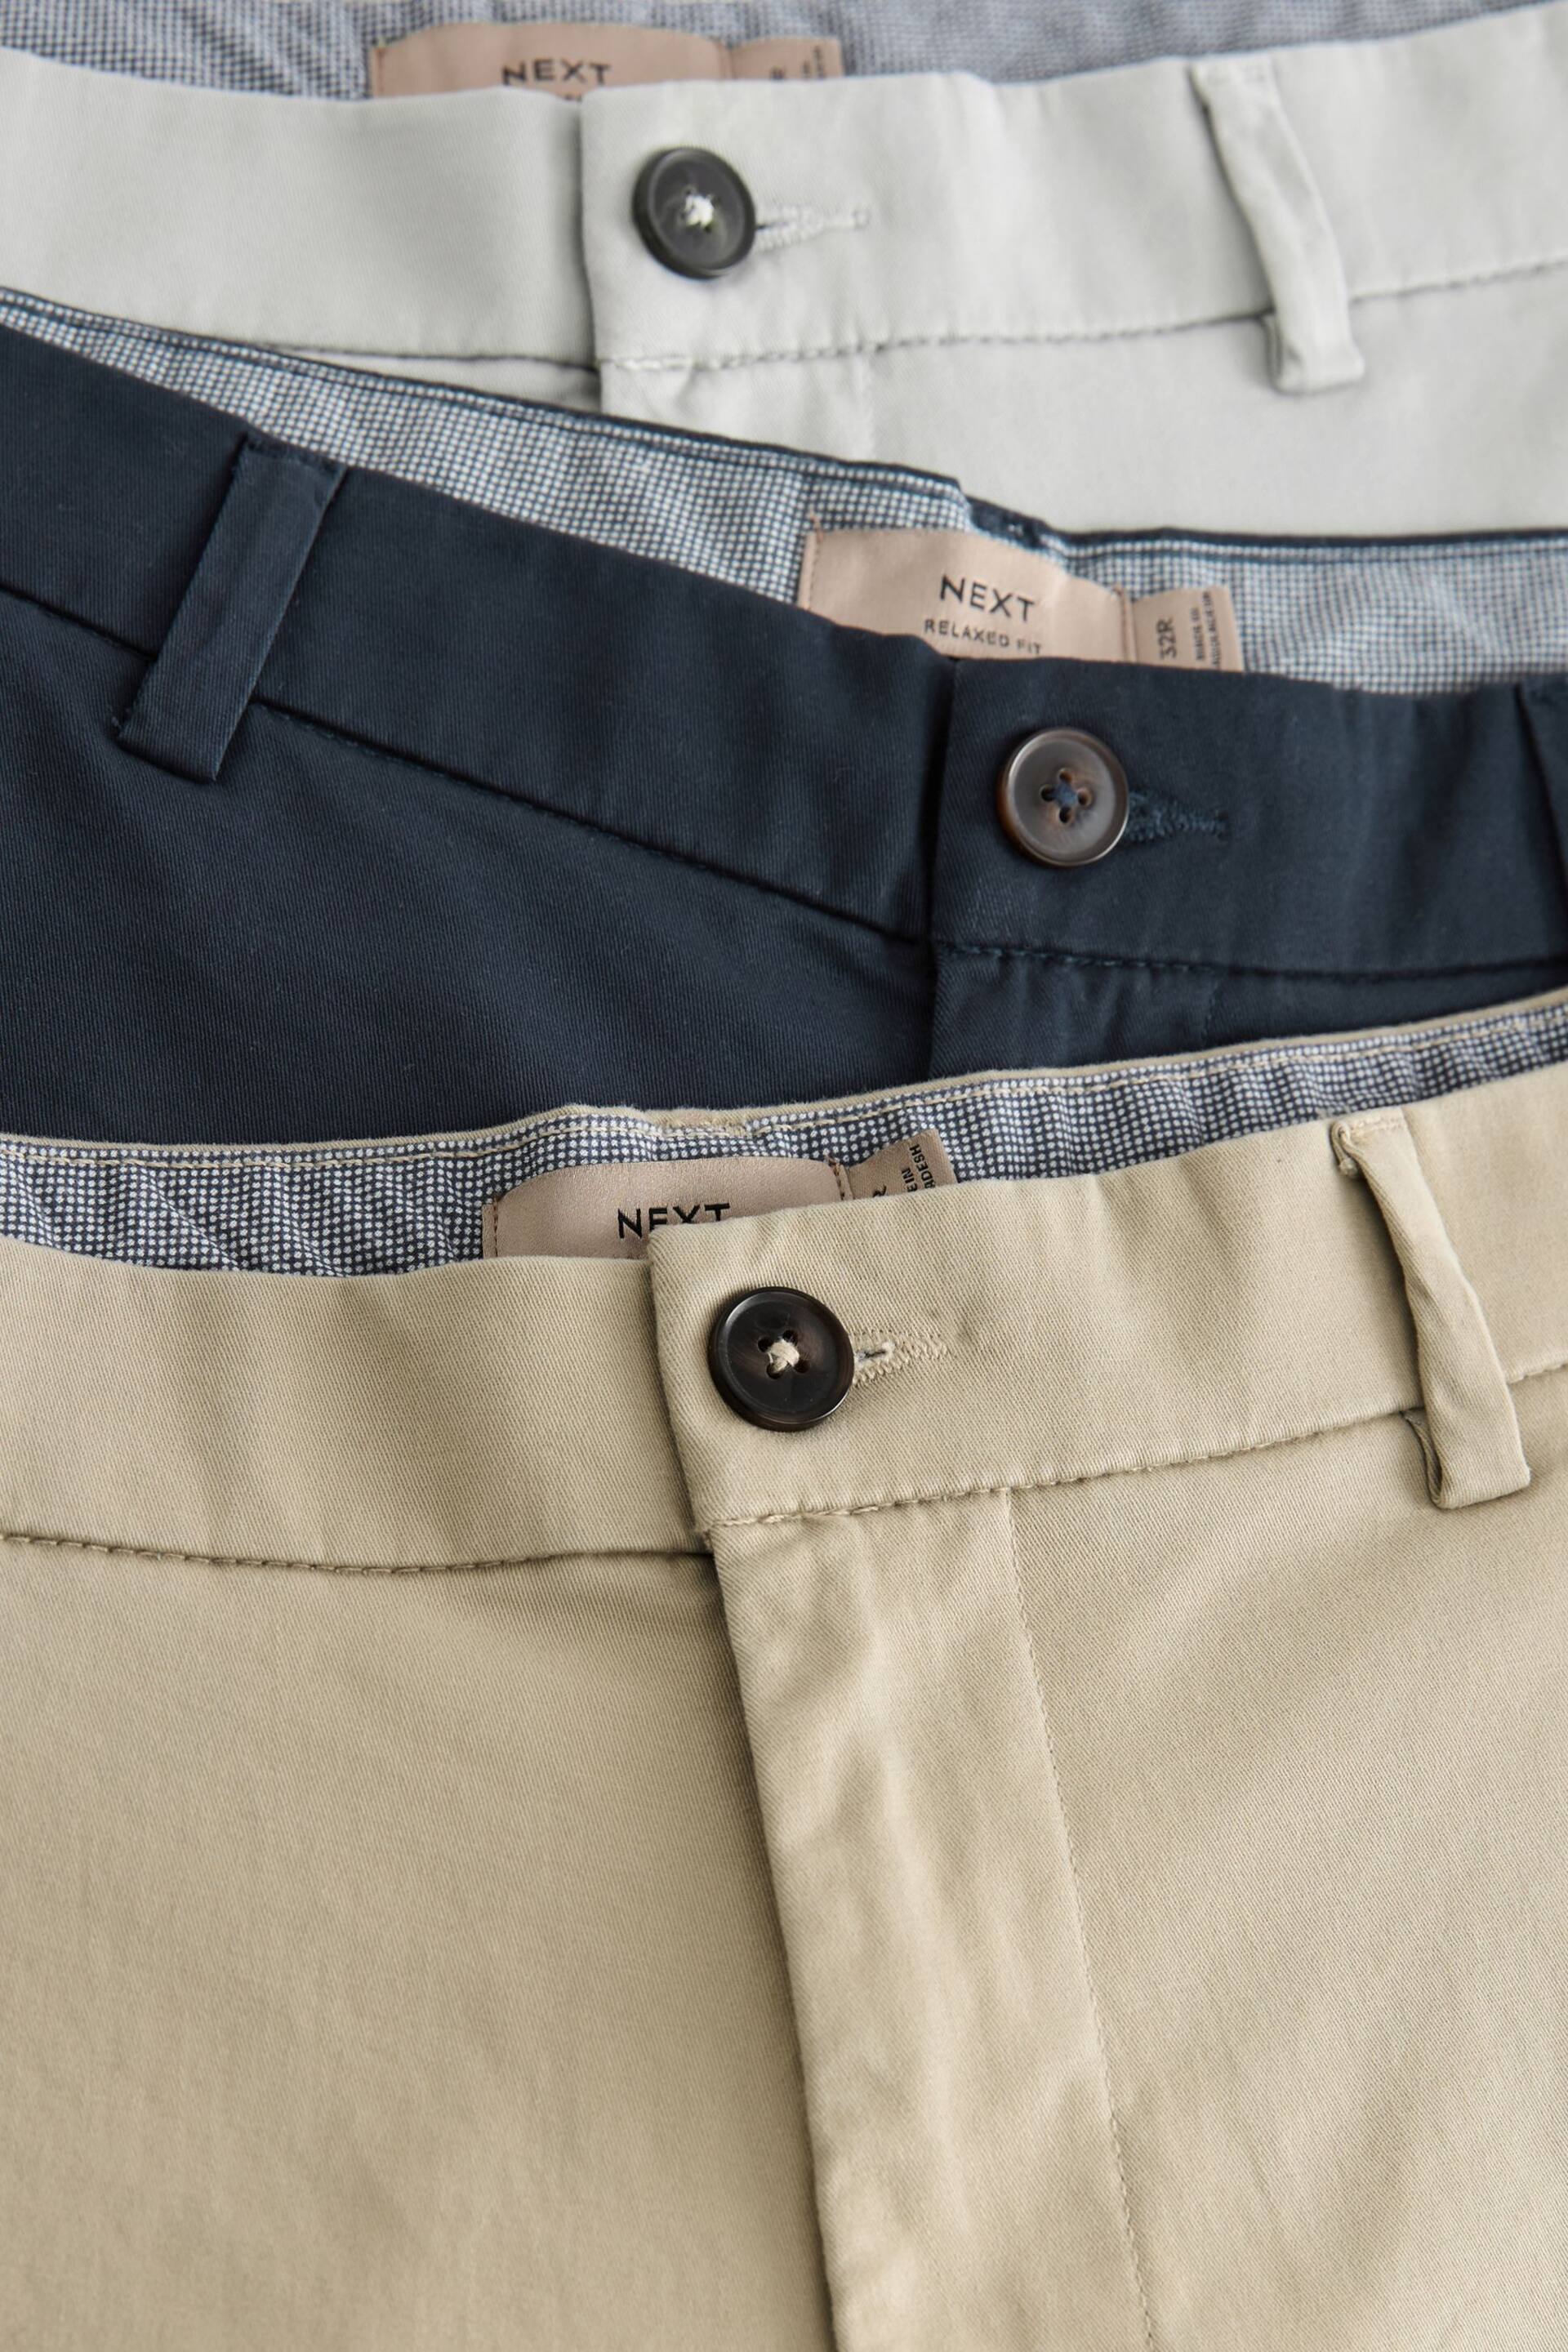 Navy Blue/Grey/Stone Loose Stretch Chinos Shorts 3 Pack - Image 11 of 15